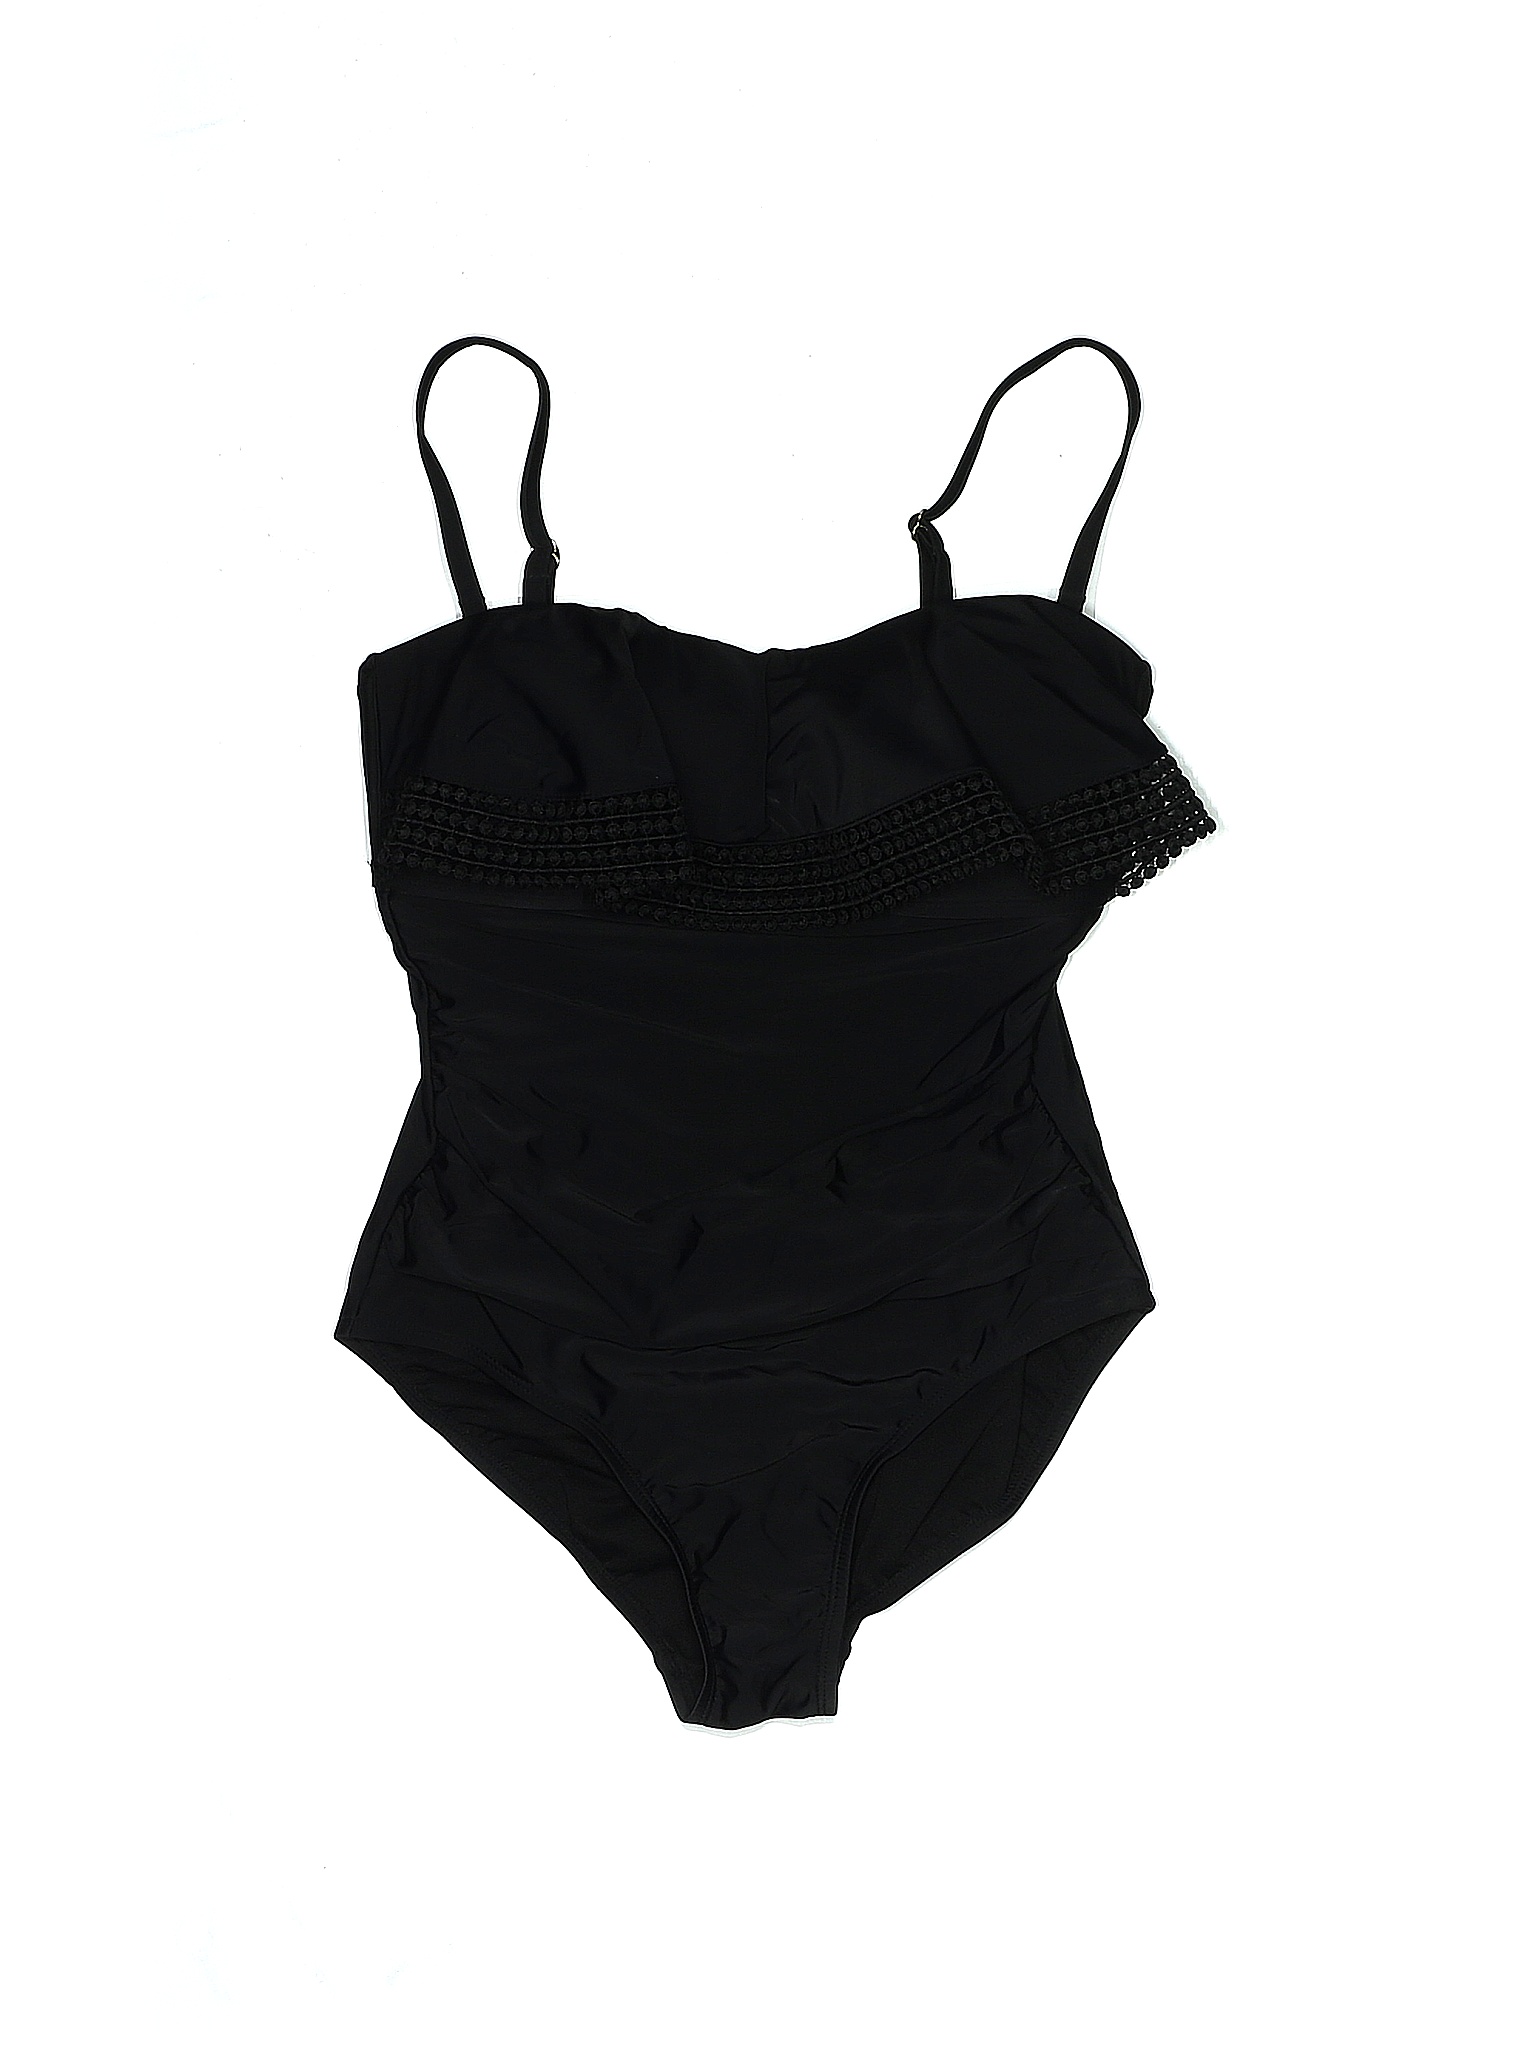 Kona Sol 100% Recycled Plastic Solid Black One Piece Swimsuit Size M ...